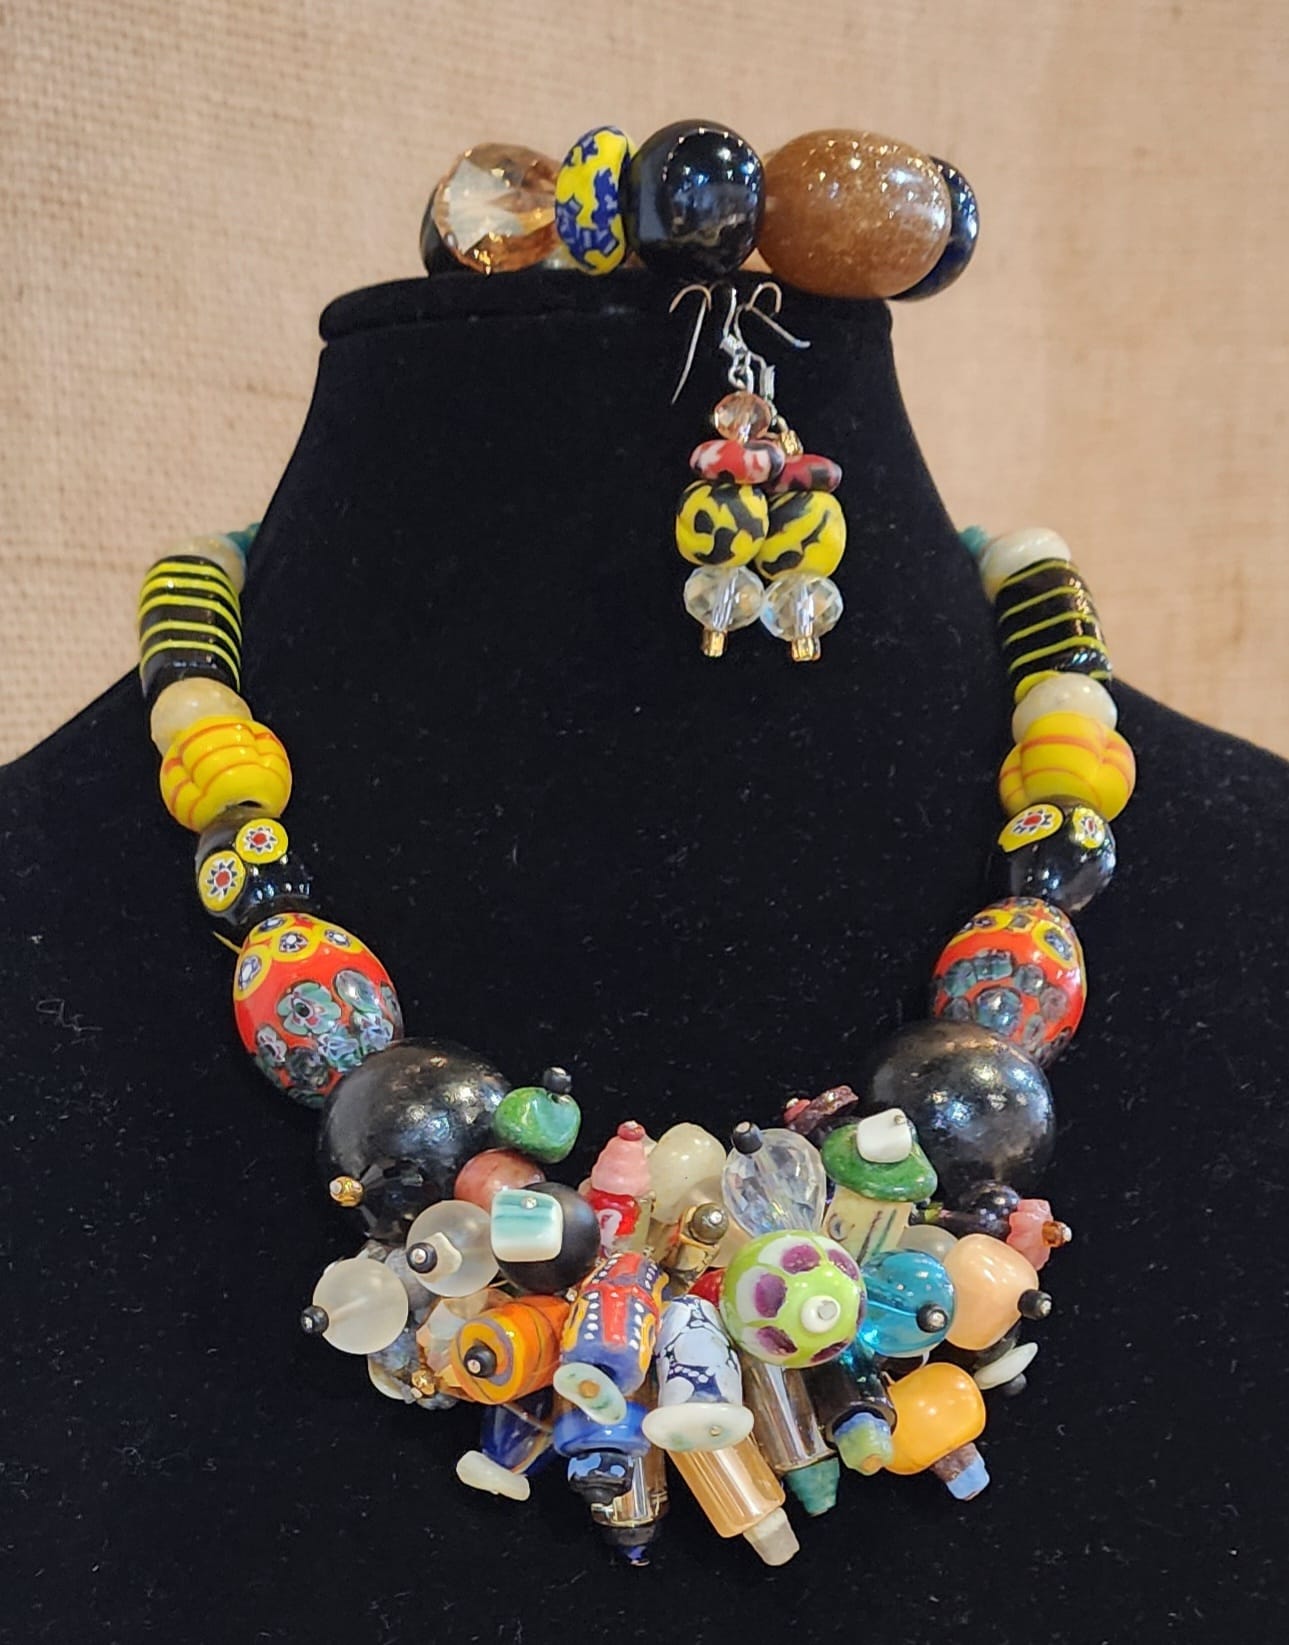 Elegant 3 piece handmade mix glass beads, krobo beads, and south African stone necklace set